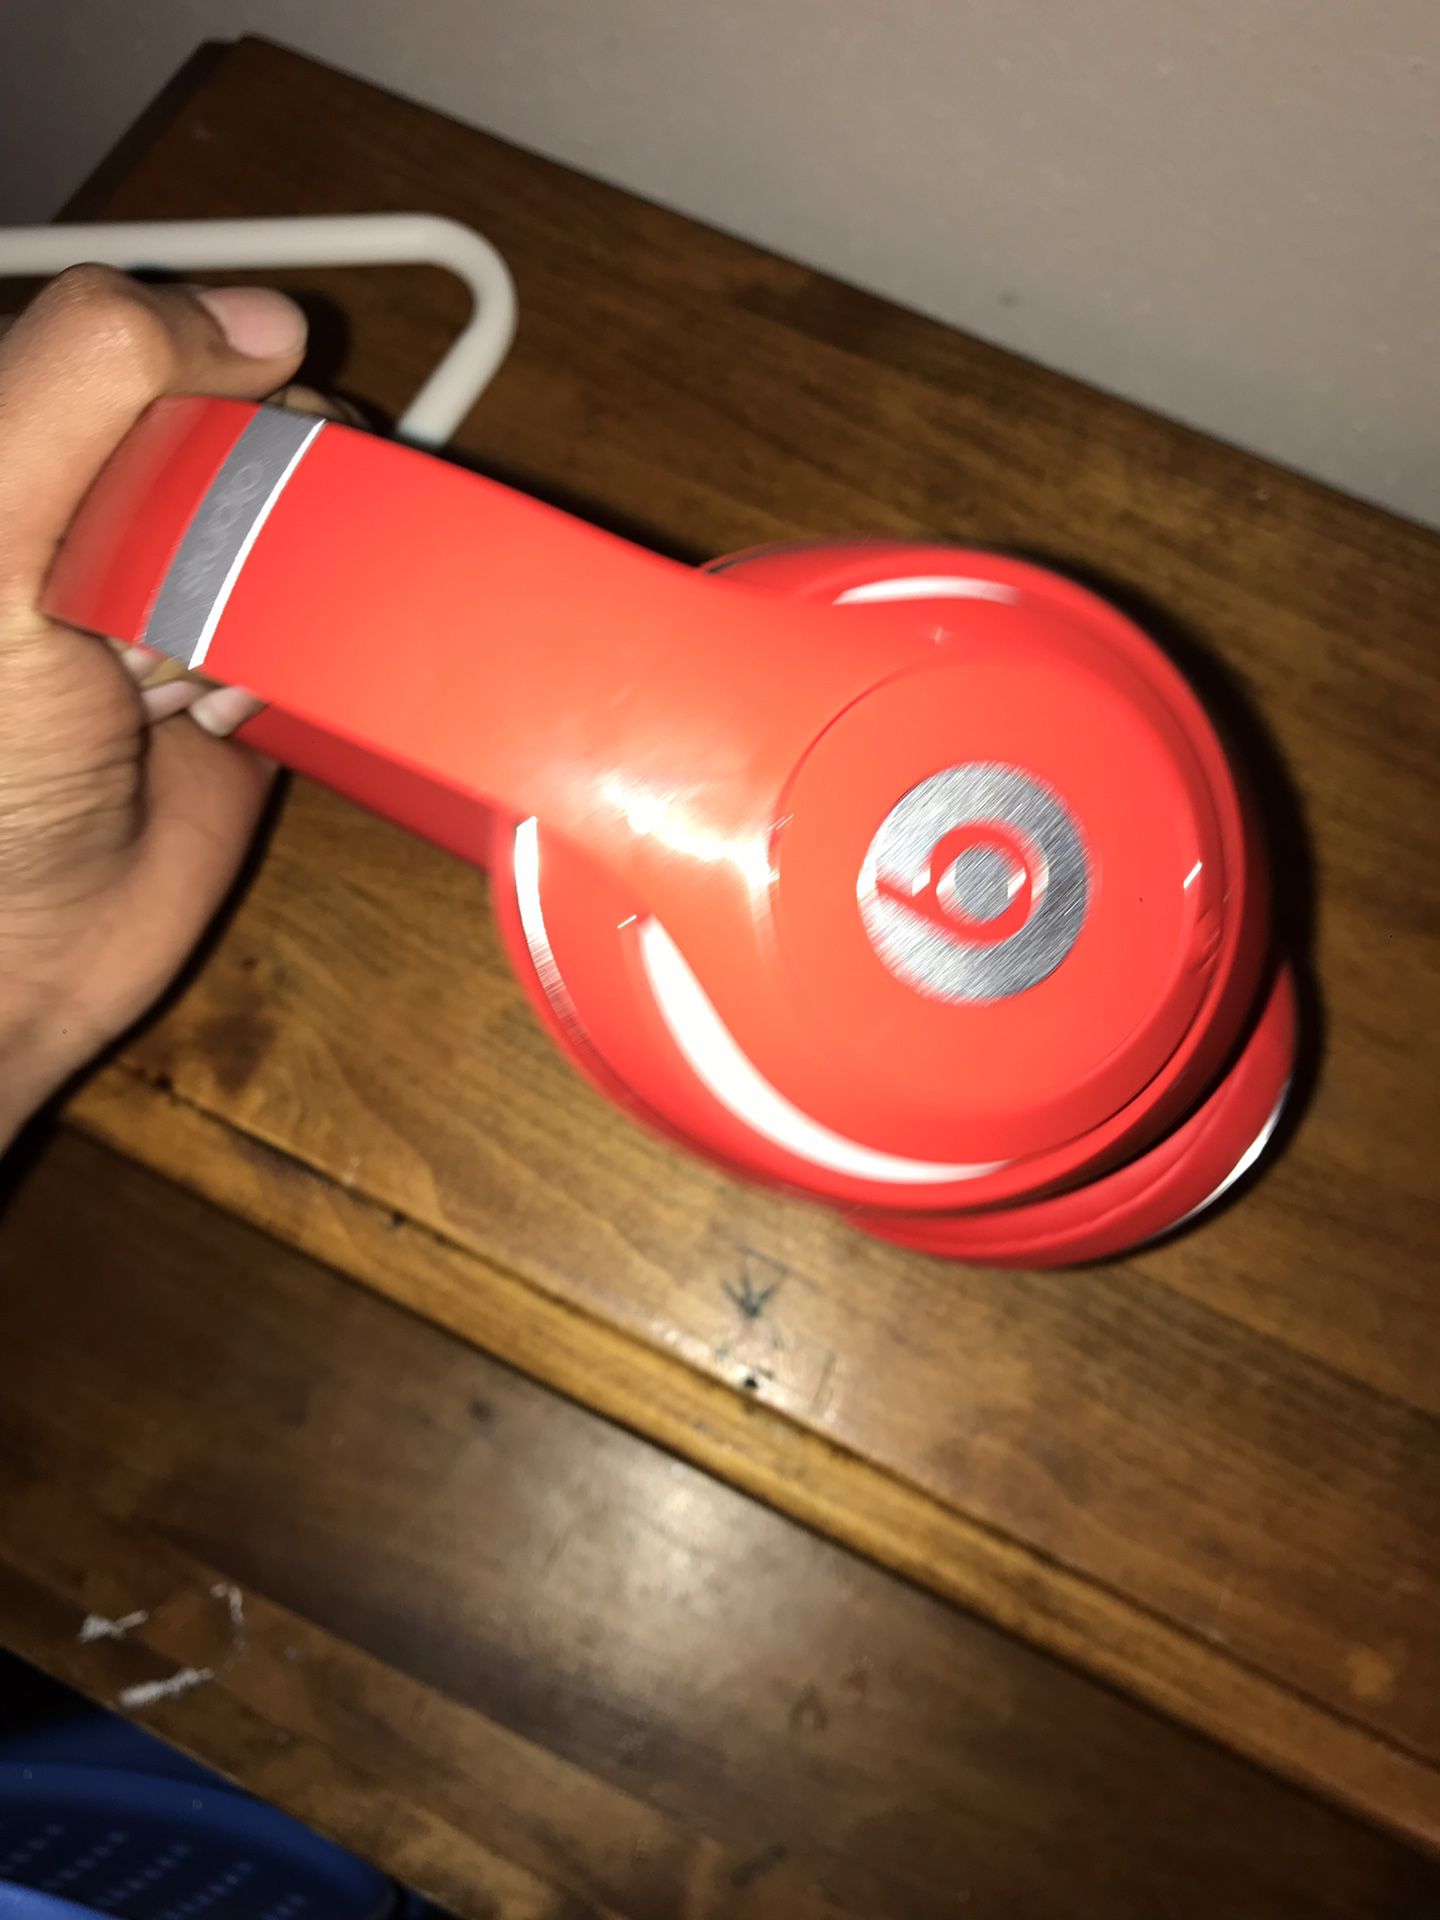 BEATS STUDIO USED 5 TIMES BUT YOU CANT TELL BASICALLY BRAND NEW COMES WITH EVERYTHING